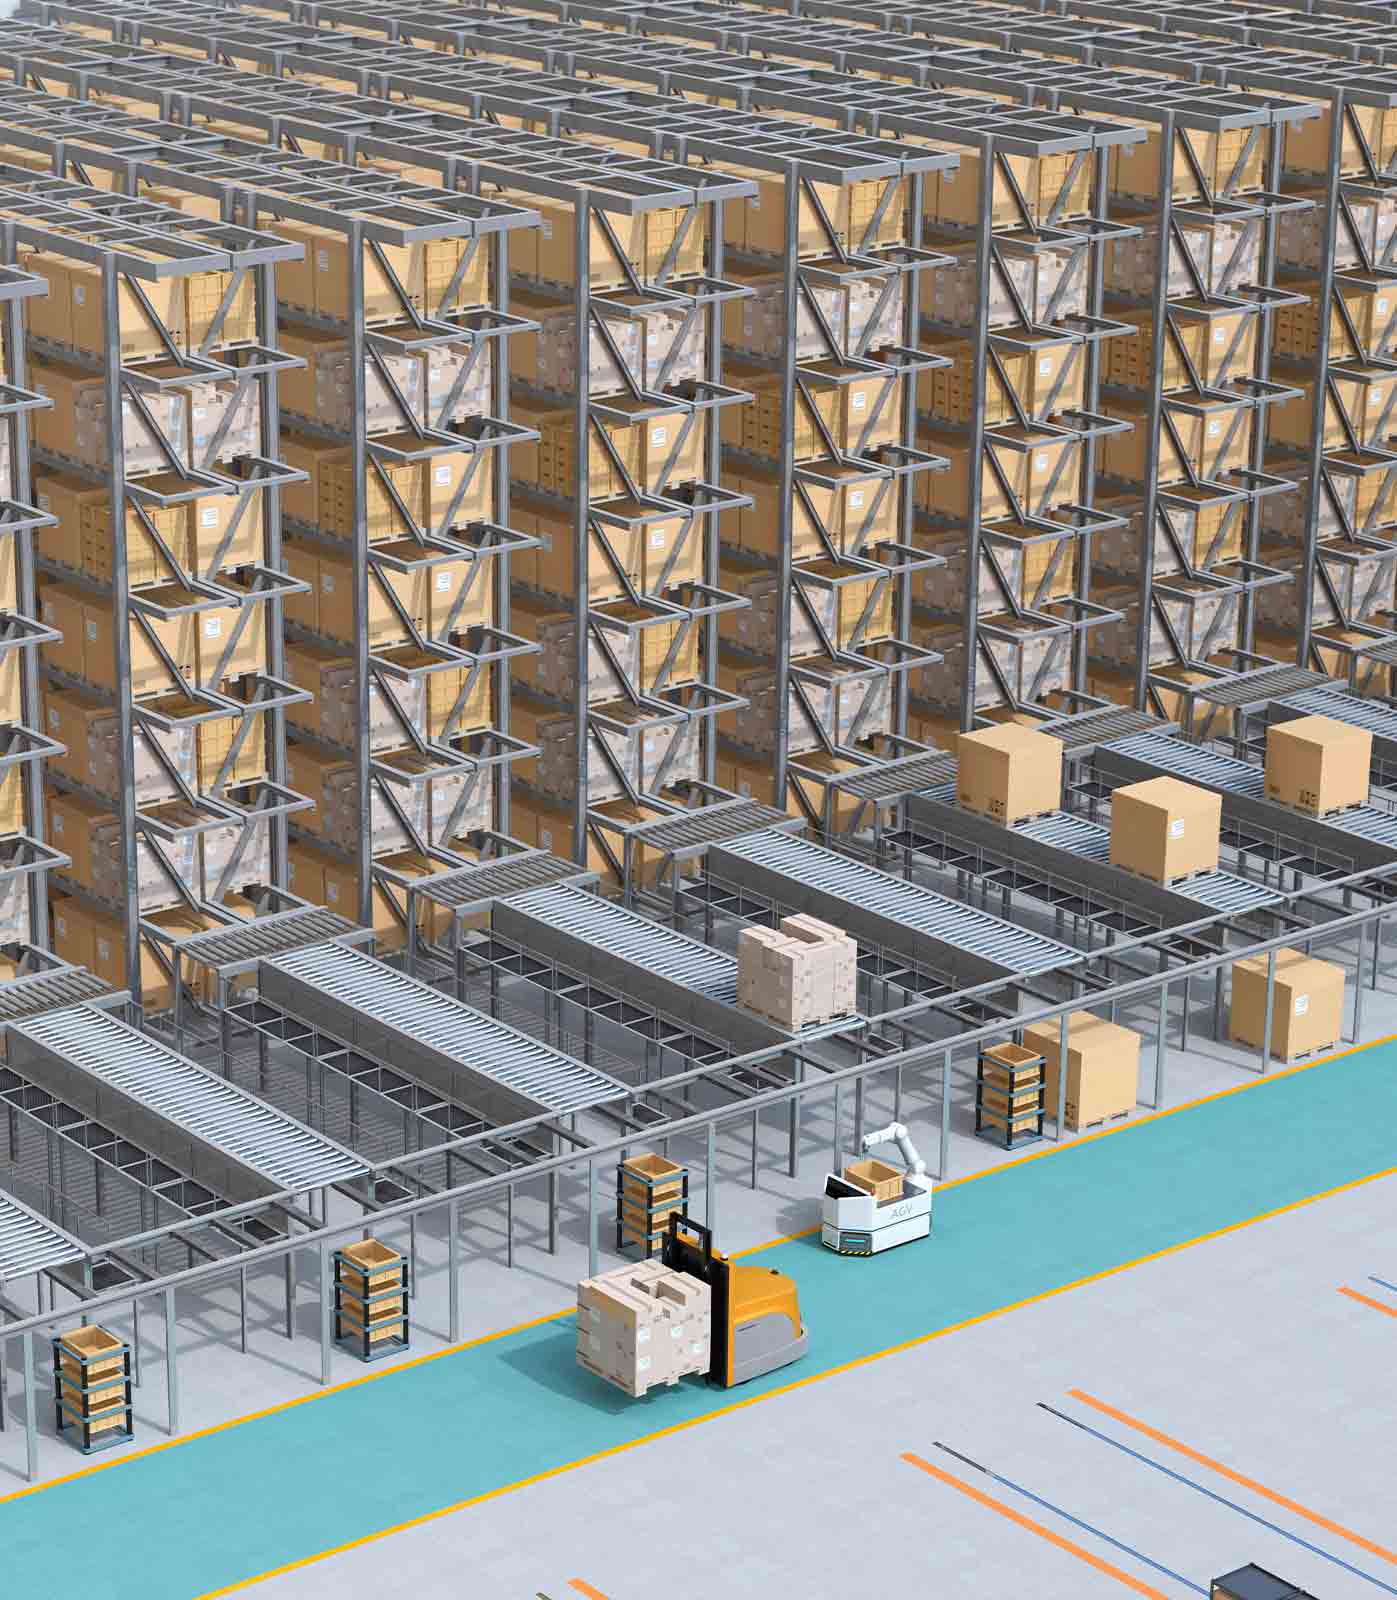 Do You Need More Than One Fulfillment Center?